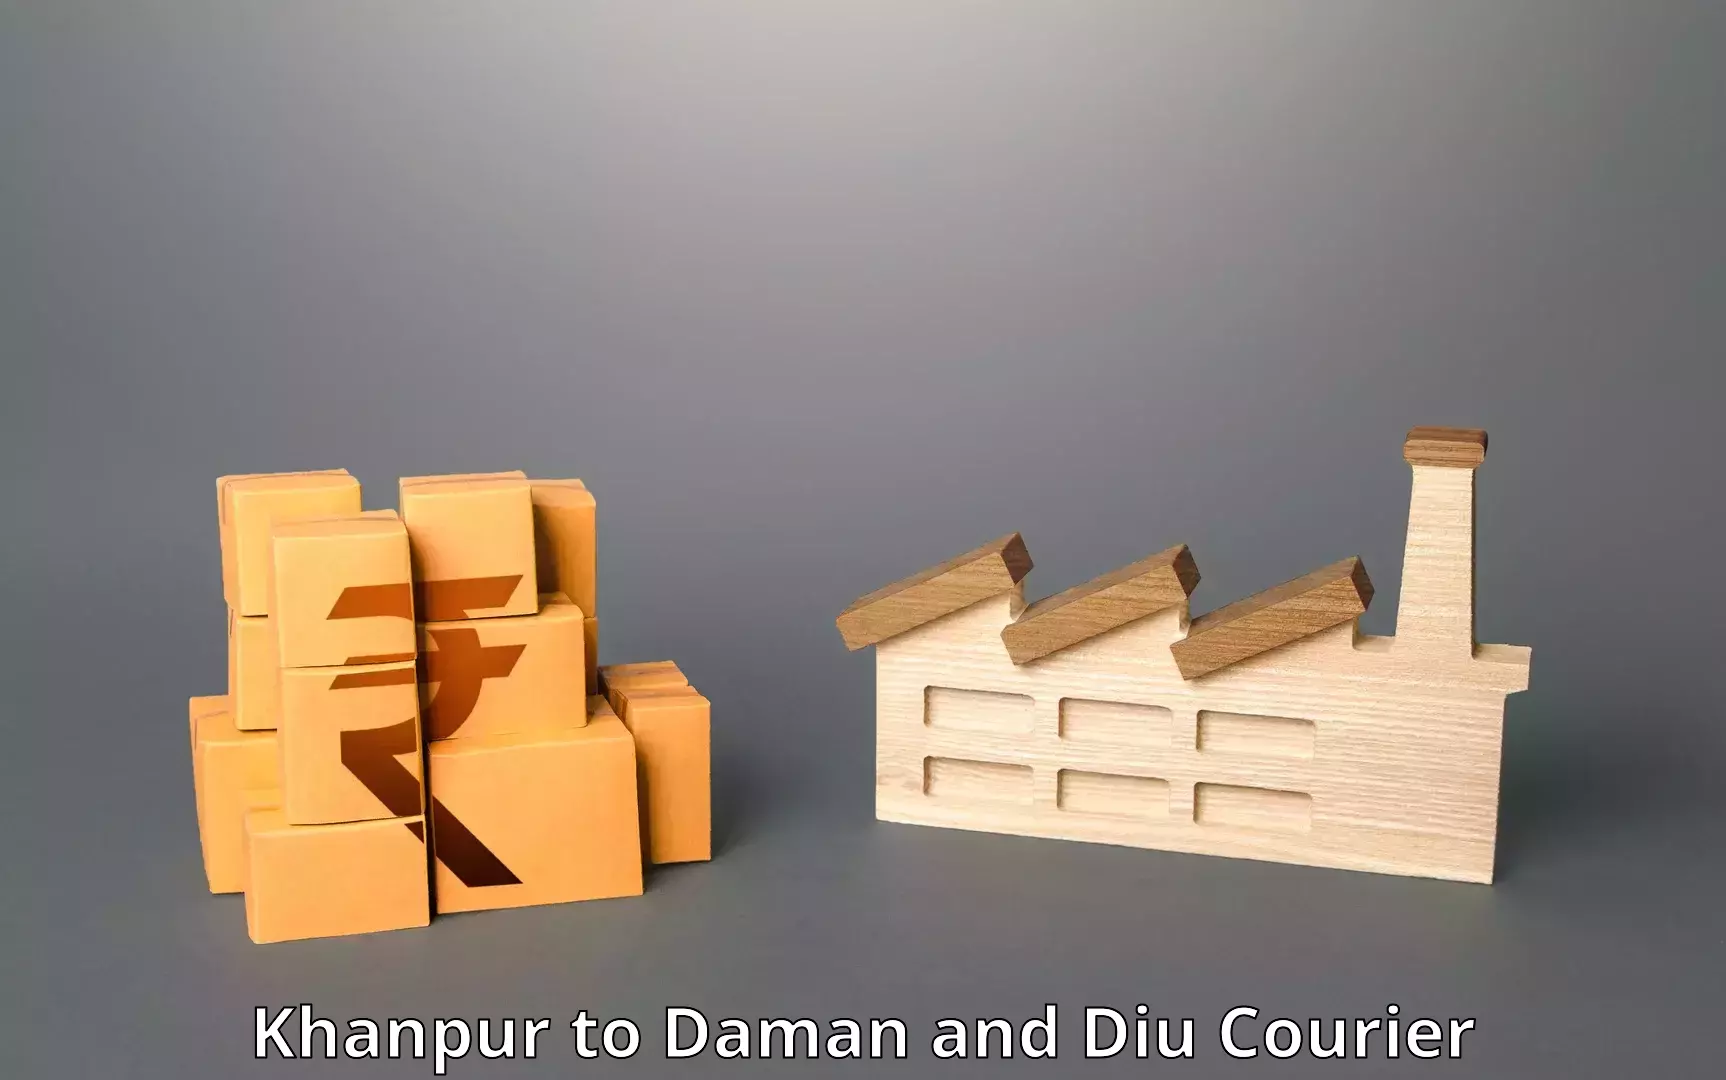 Nationwide shipping coverage Khanpur to Daman and Diu